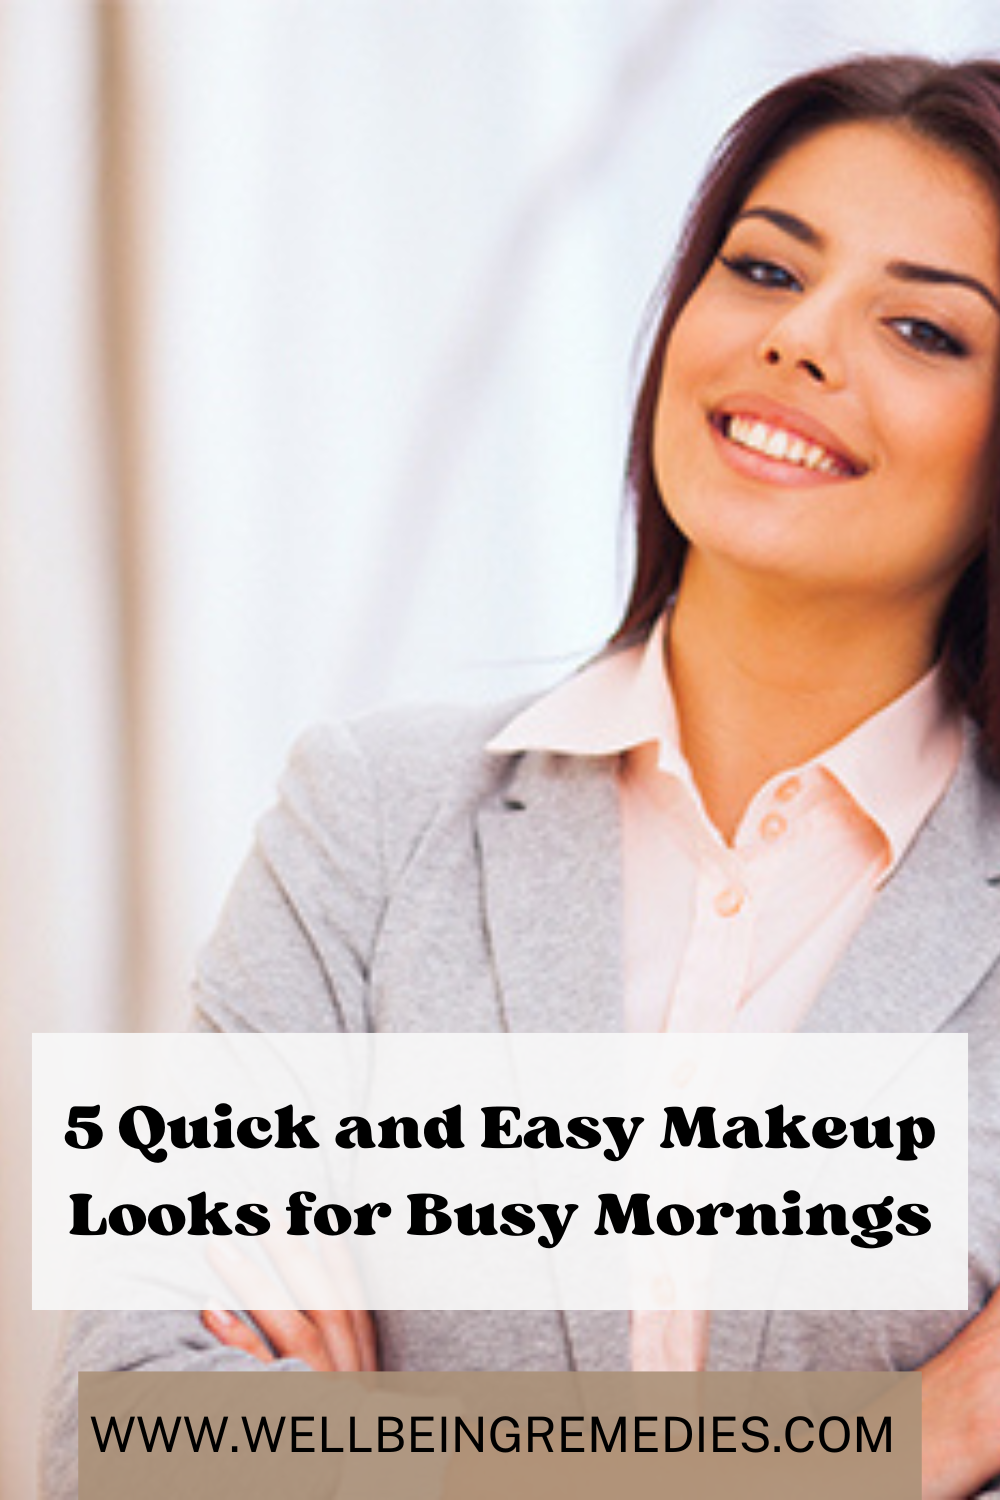 5 Quick and Easy Makeup Looks for Busy Mornings